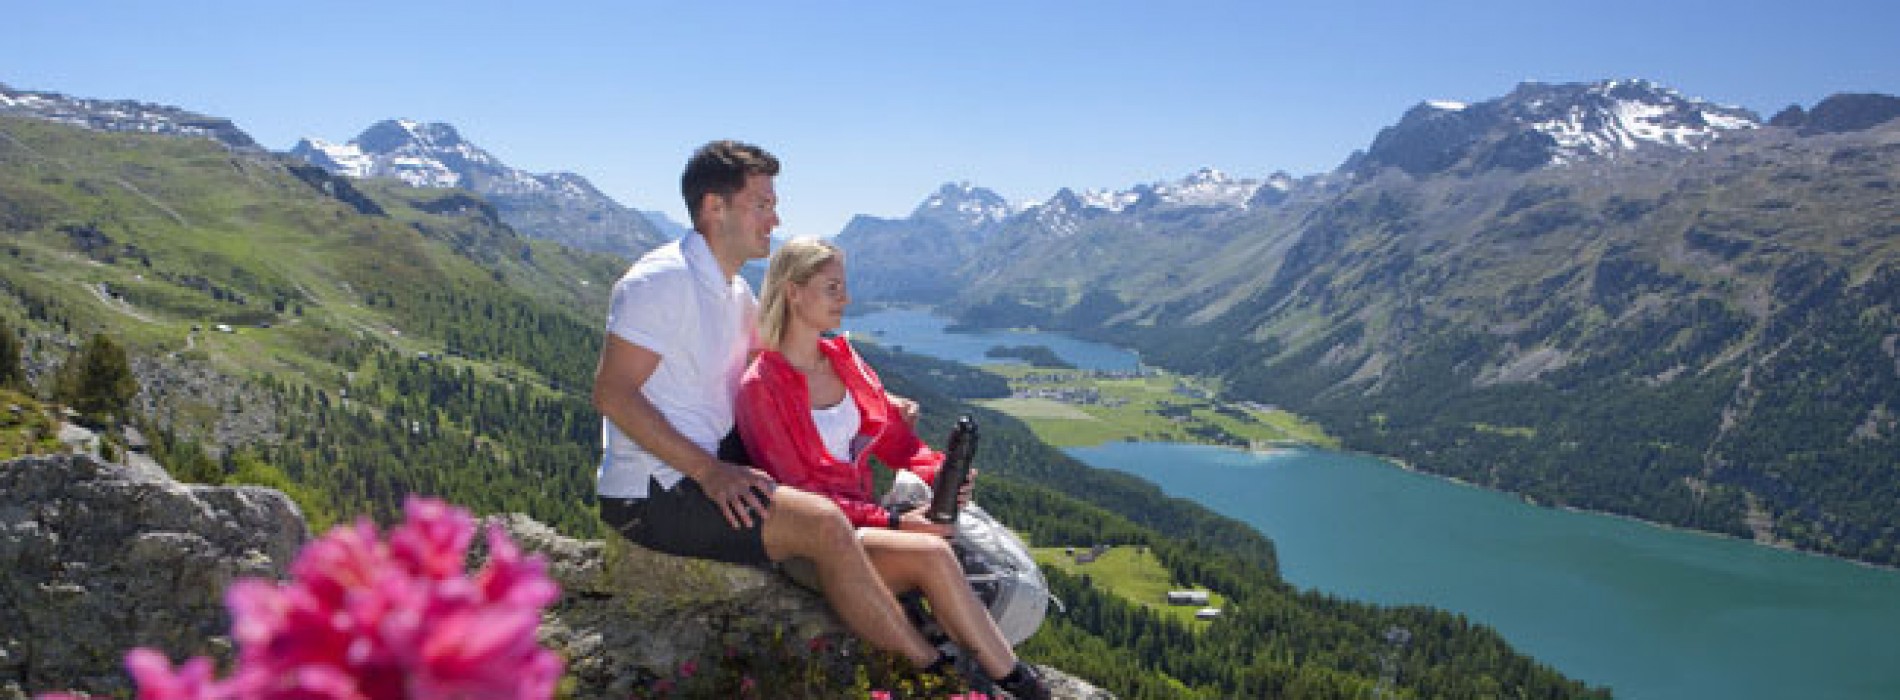 Spend this Summer exploring adventure activities with your family at St. Moritz